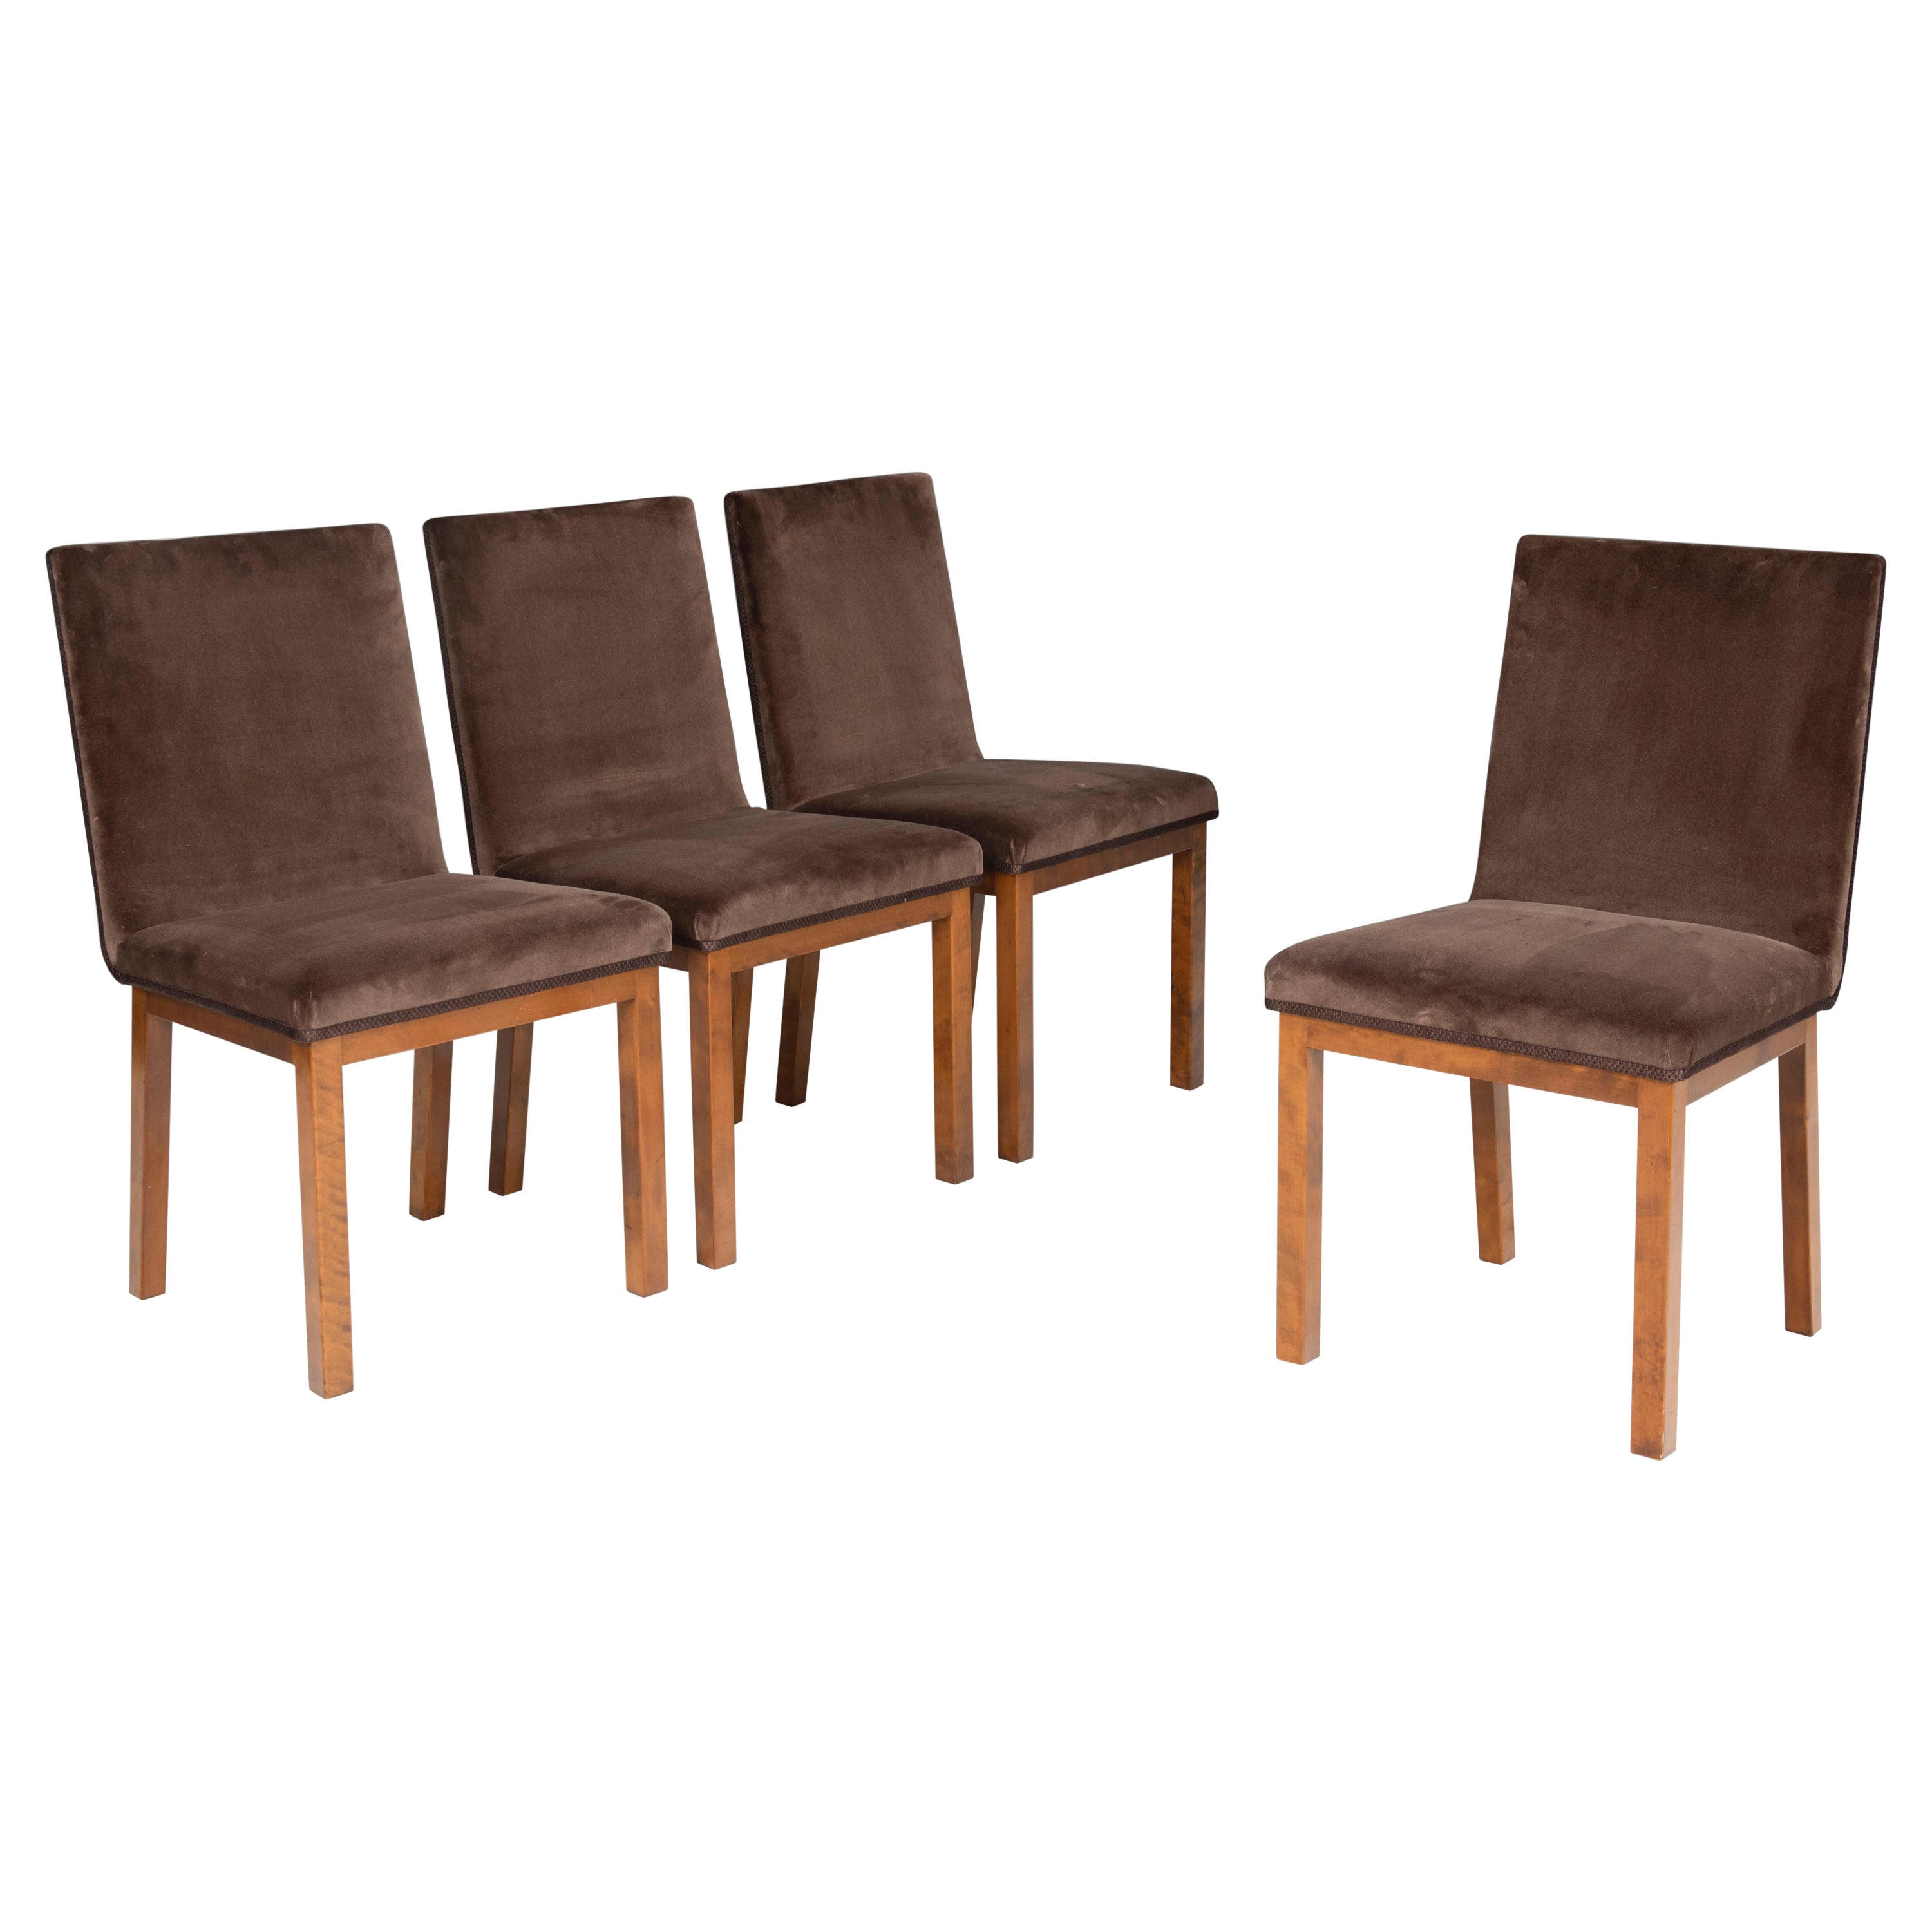 Axel Einar Hjorth Corall Set of 4 Chairs Birch and Velvet 1934 For Sale